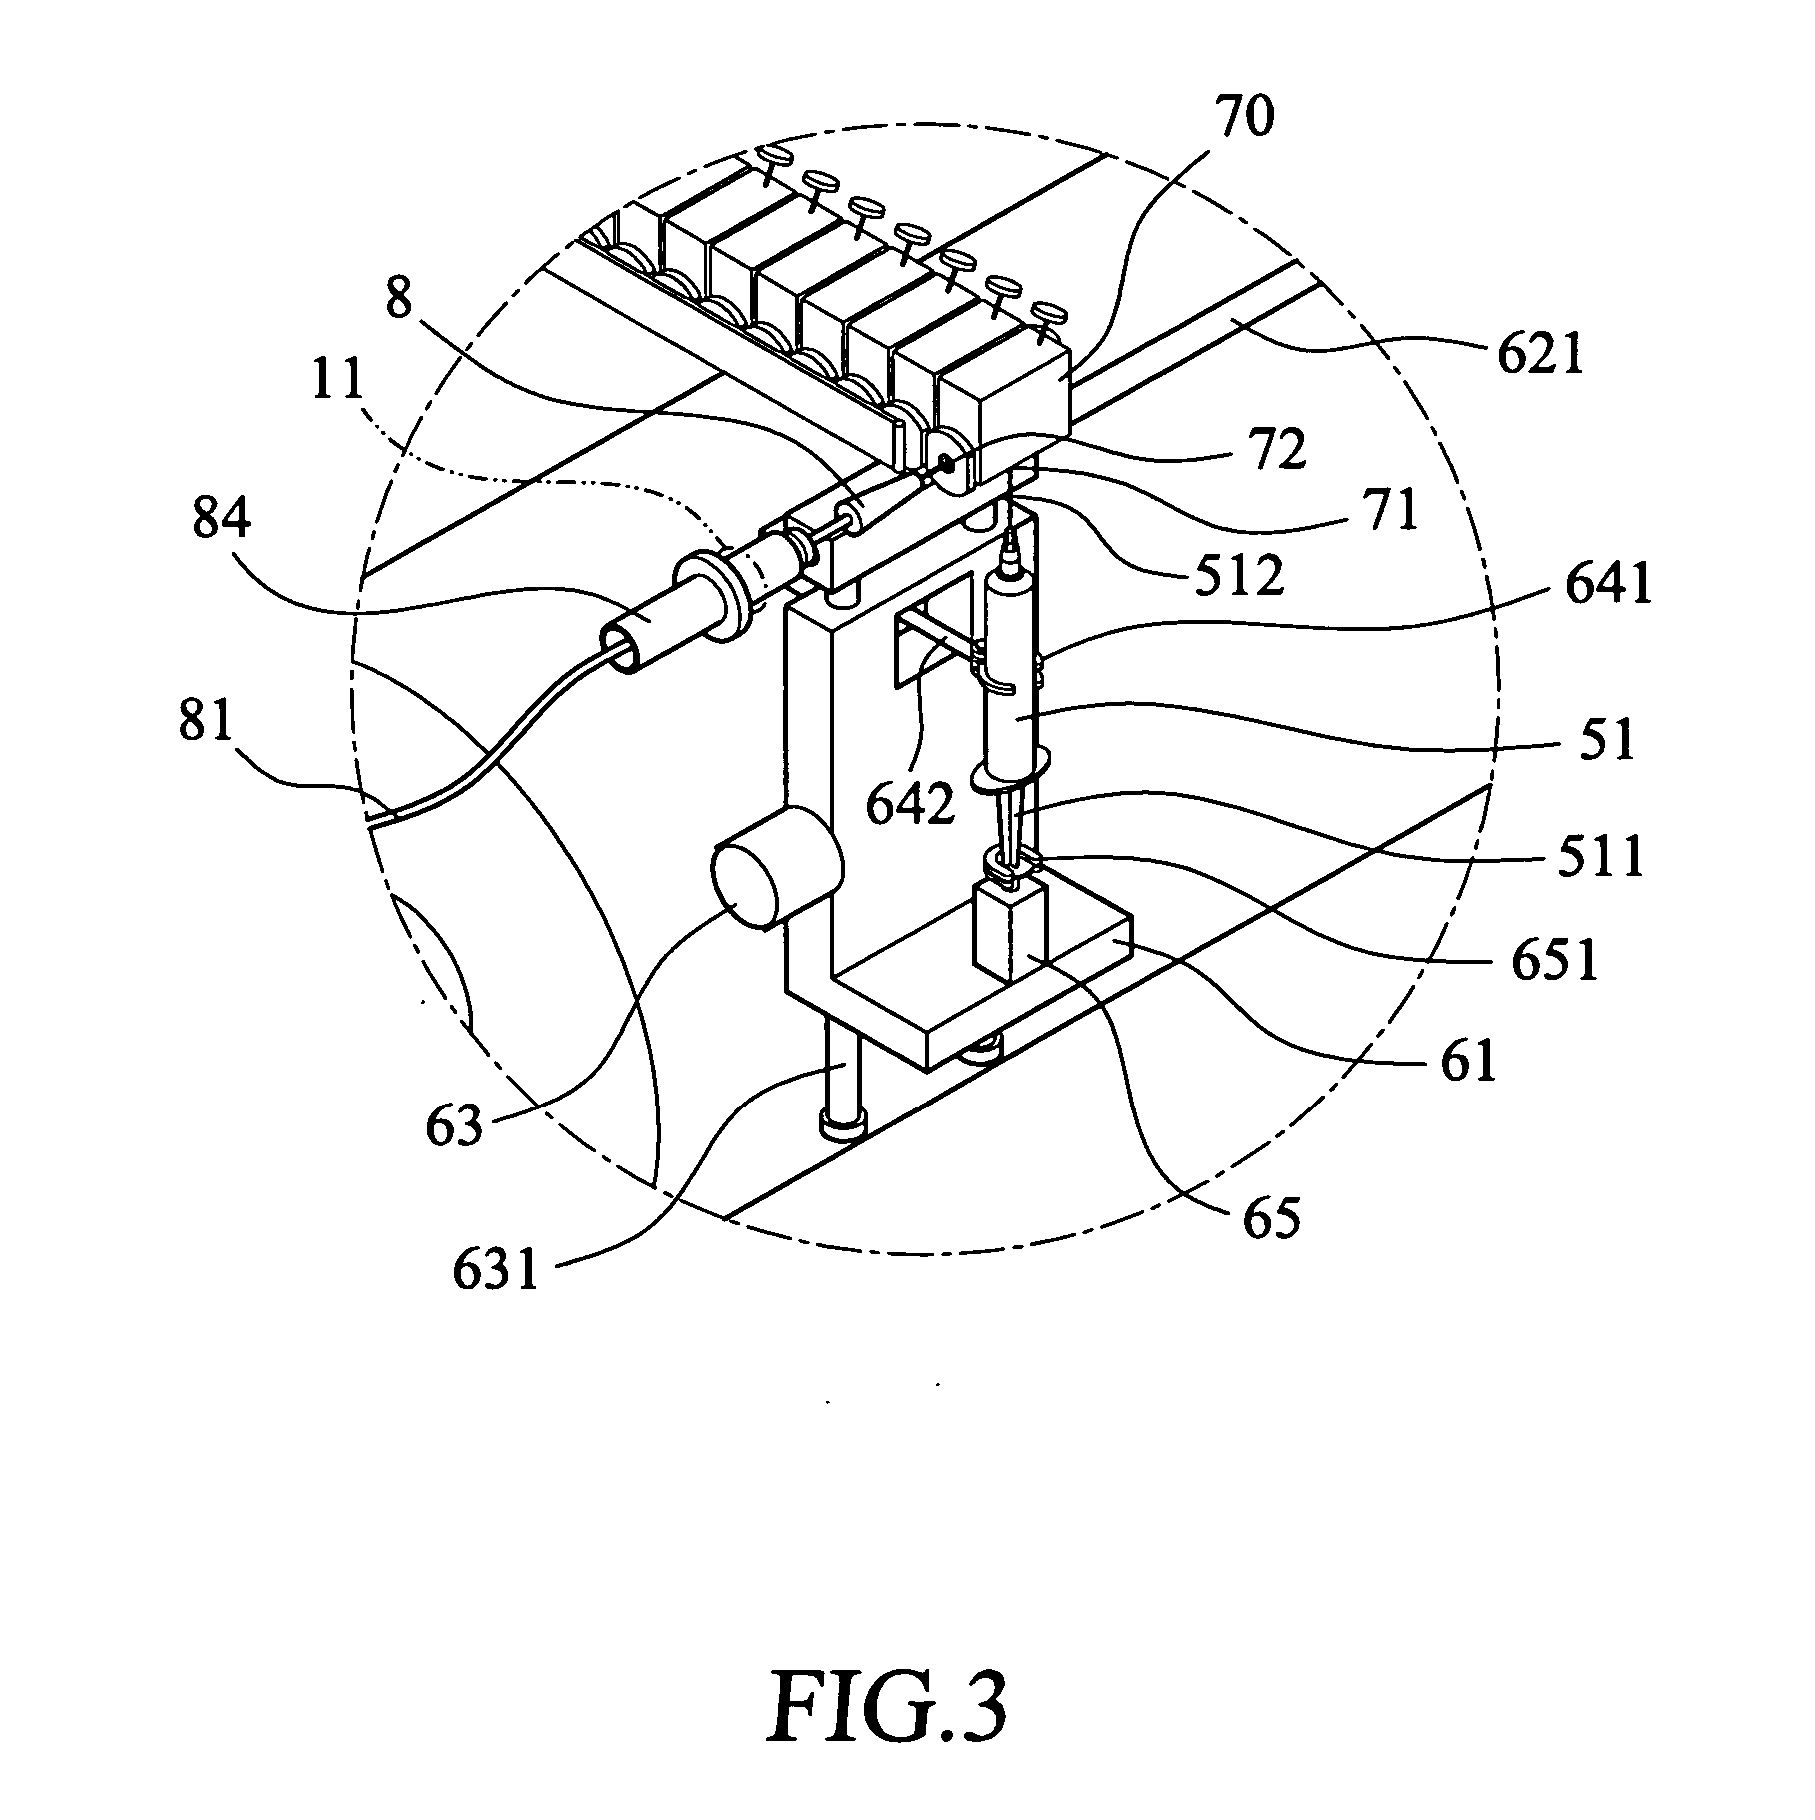 Disposable saline water cartridge module for radiopharmaceuticals dispensing and injection system